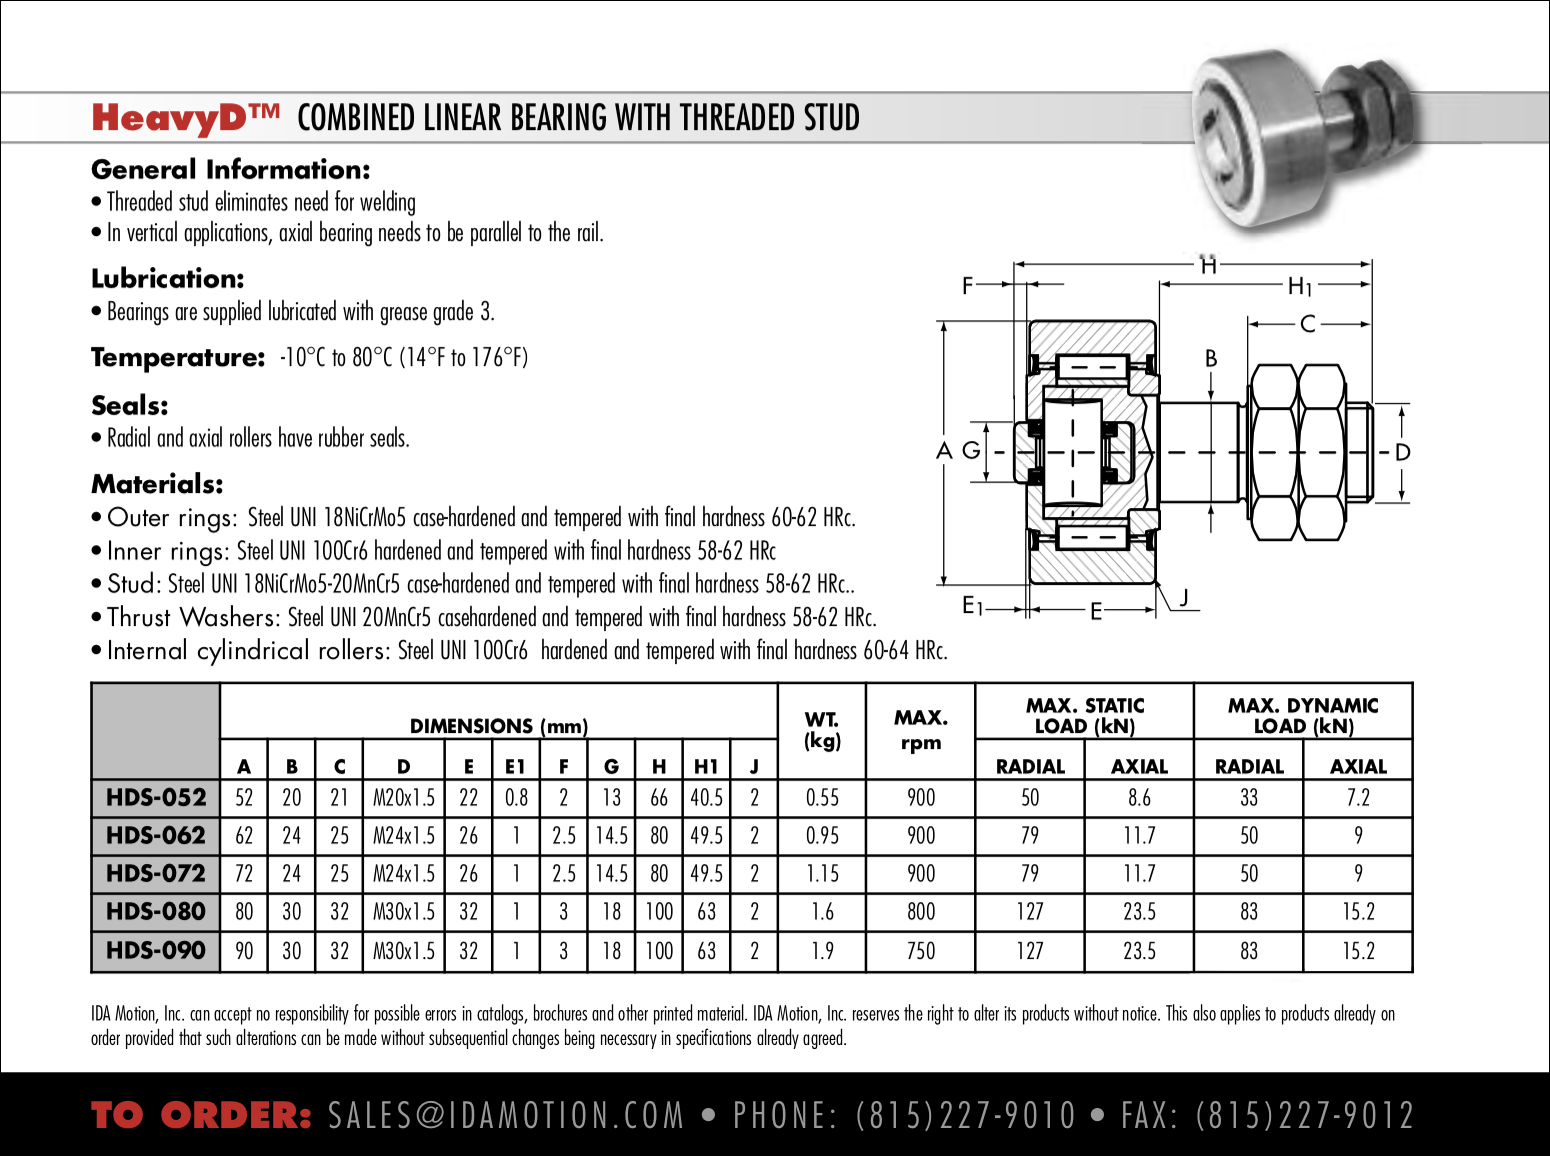 Combination Linear Bearing with Threaded Stud